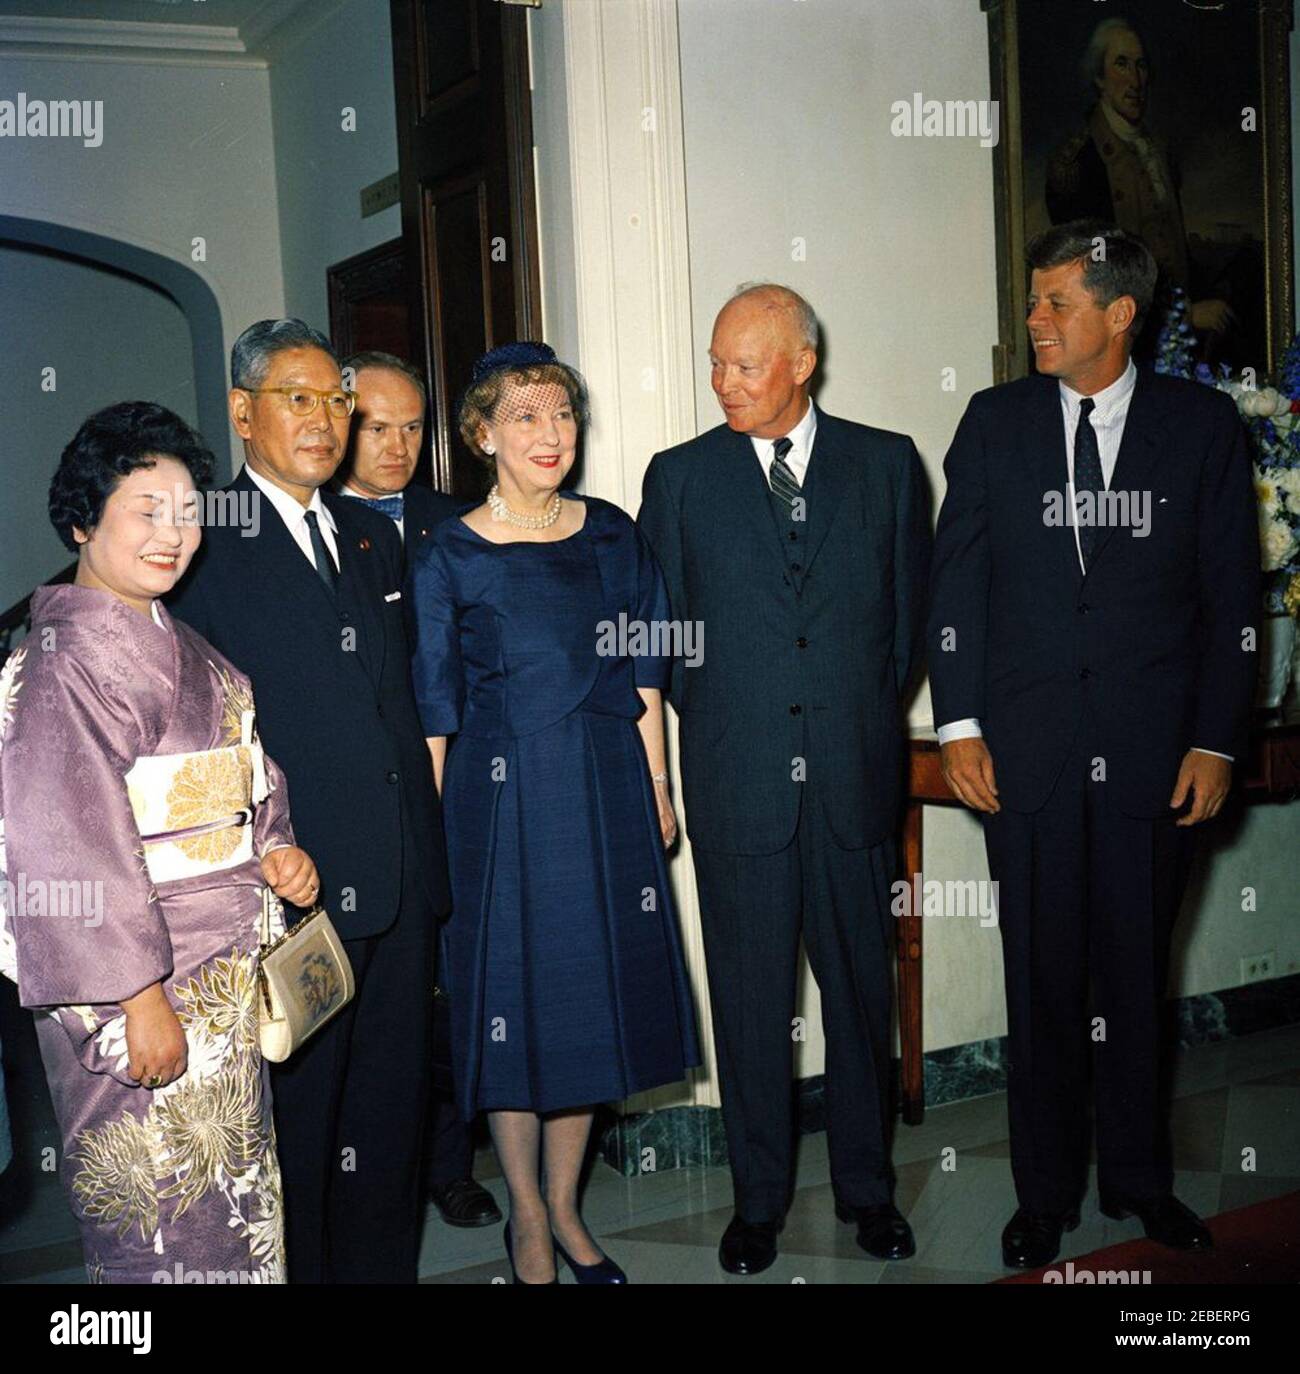 Luncheon in honor of Hayato Ikeda, Prime Minister of Japan, 1:00 PM. Luncheon in honor of Prime Minister of Japan Hayato Ikeda. (L-R) Mitsue Ikeda, Prime Minister of Japan Hayato Ikeda, interpreter James J. Wickel, former First Lady Mamie Doud Eisenhower, former President Dwight D. Eisenhower, and President John F. Kennedy. North Portico, White House, Washington, D.C. Stock Photo